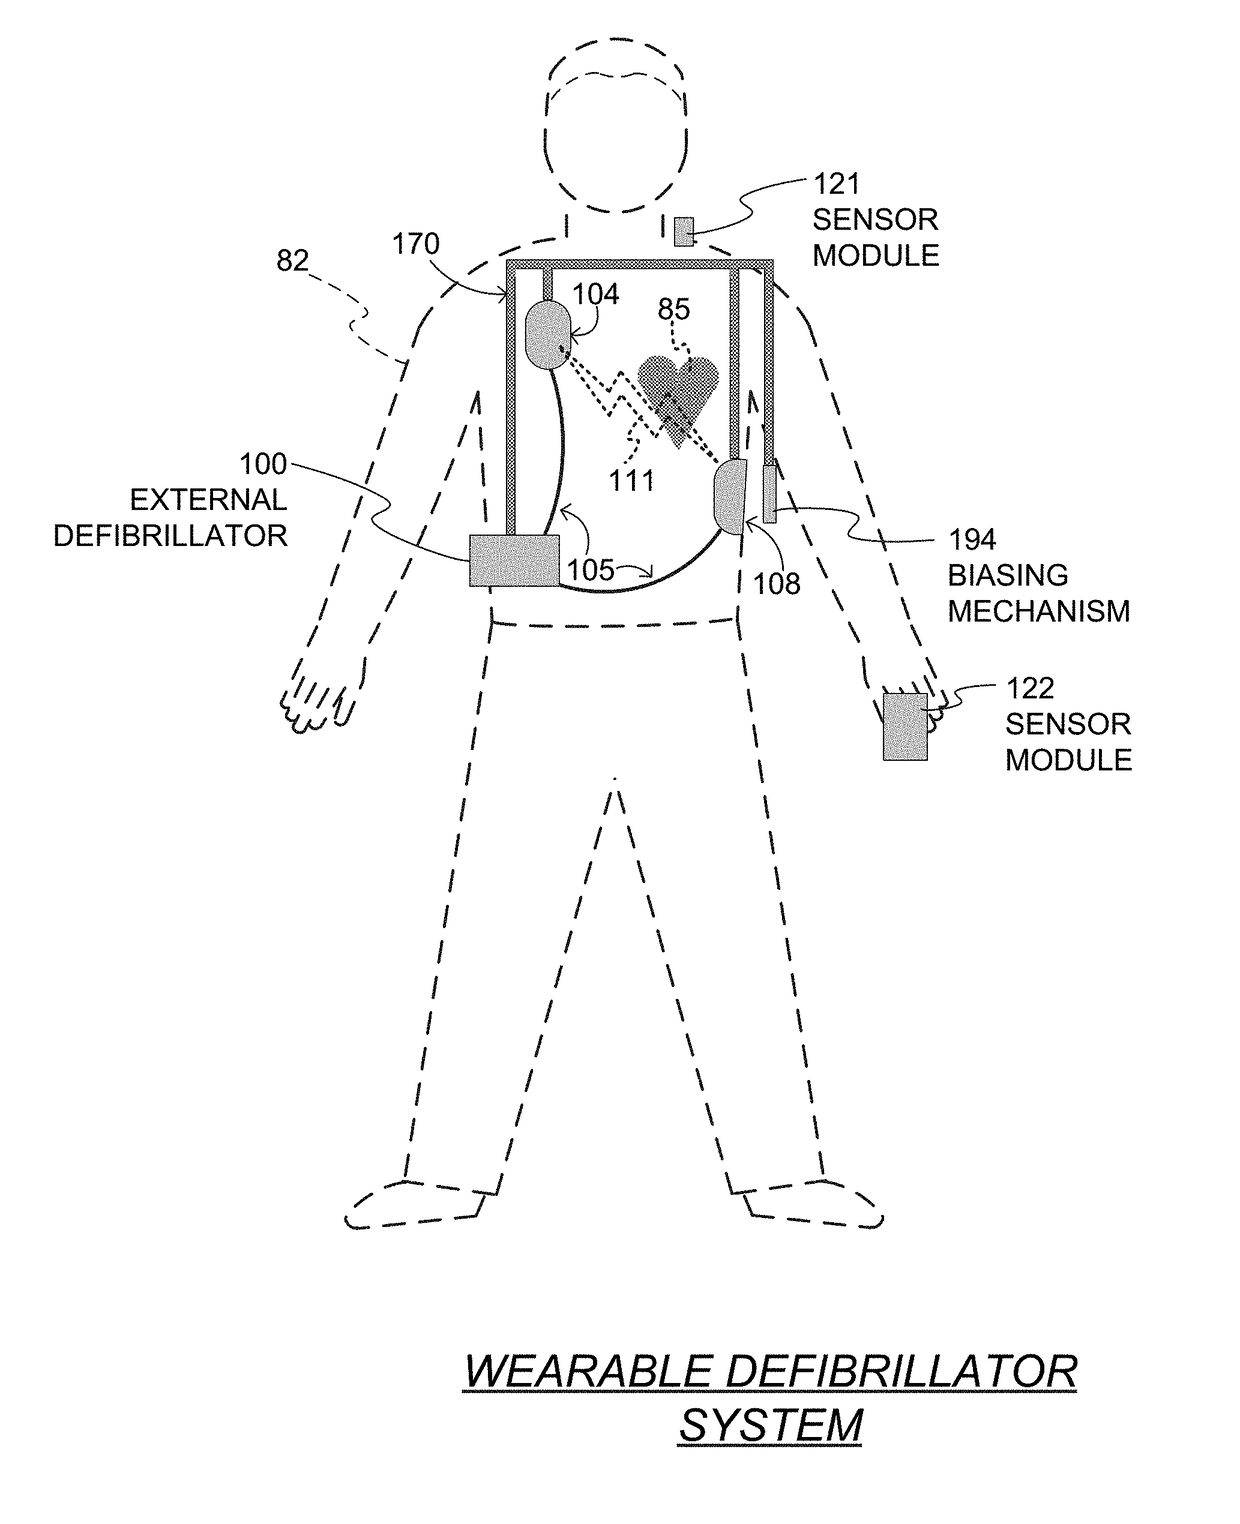 Wearable cardiac defibrillator system long-term monitoring alternating patient parameters other than ECG